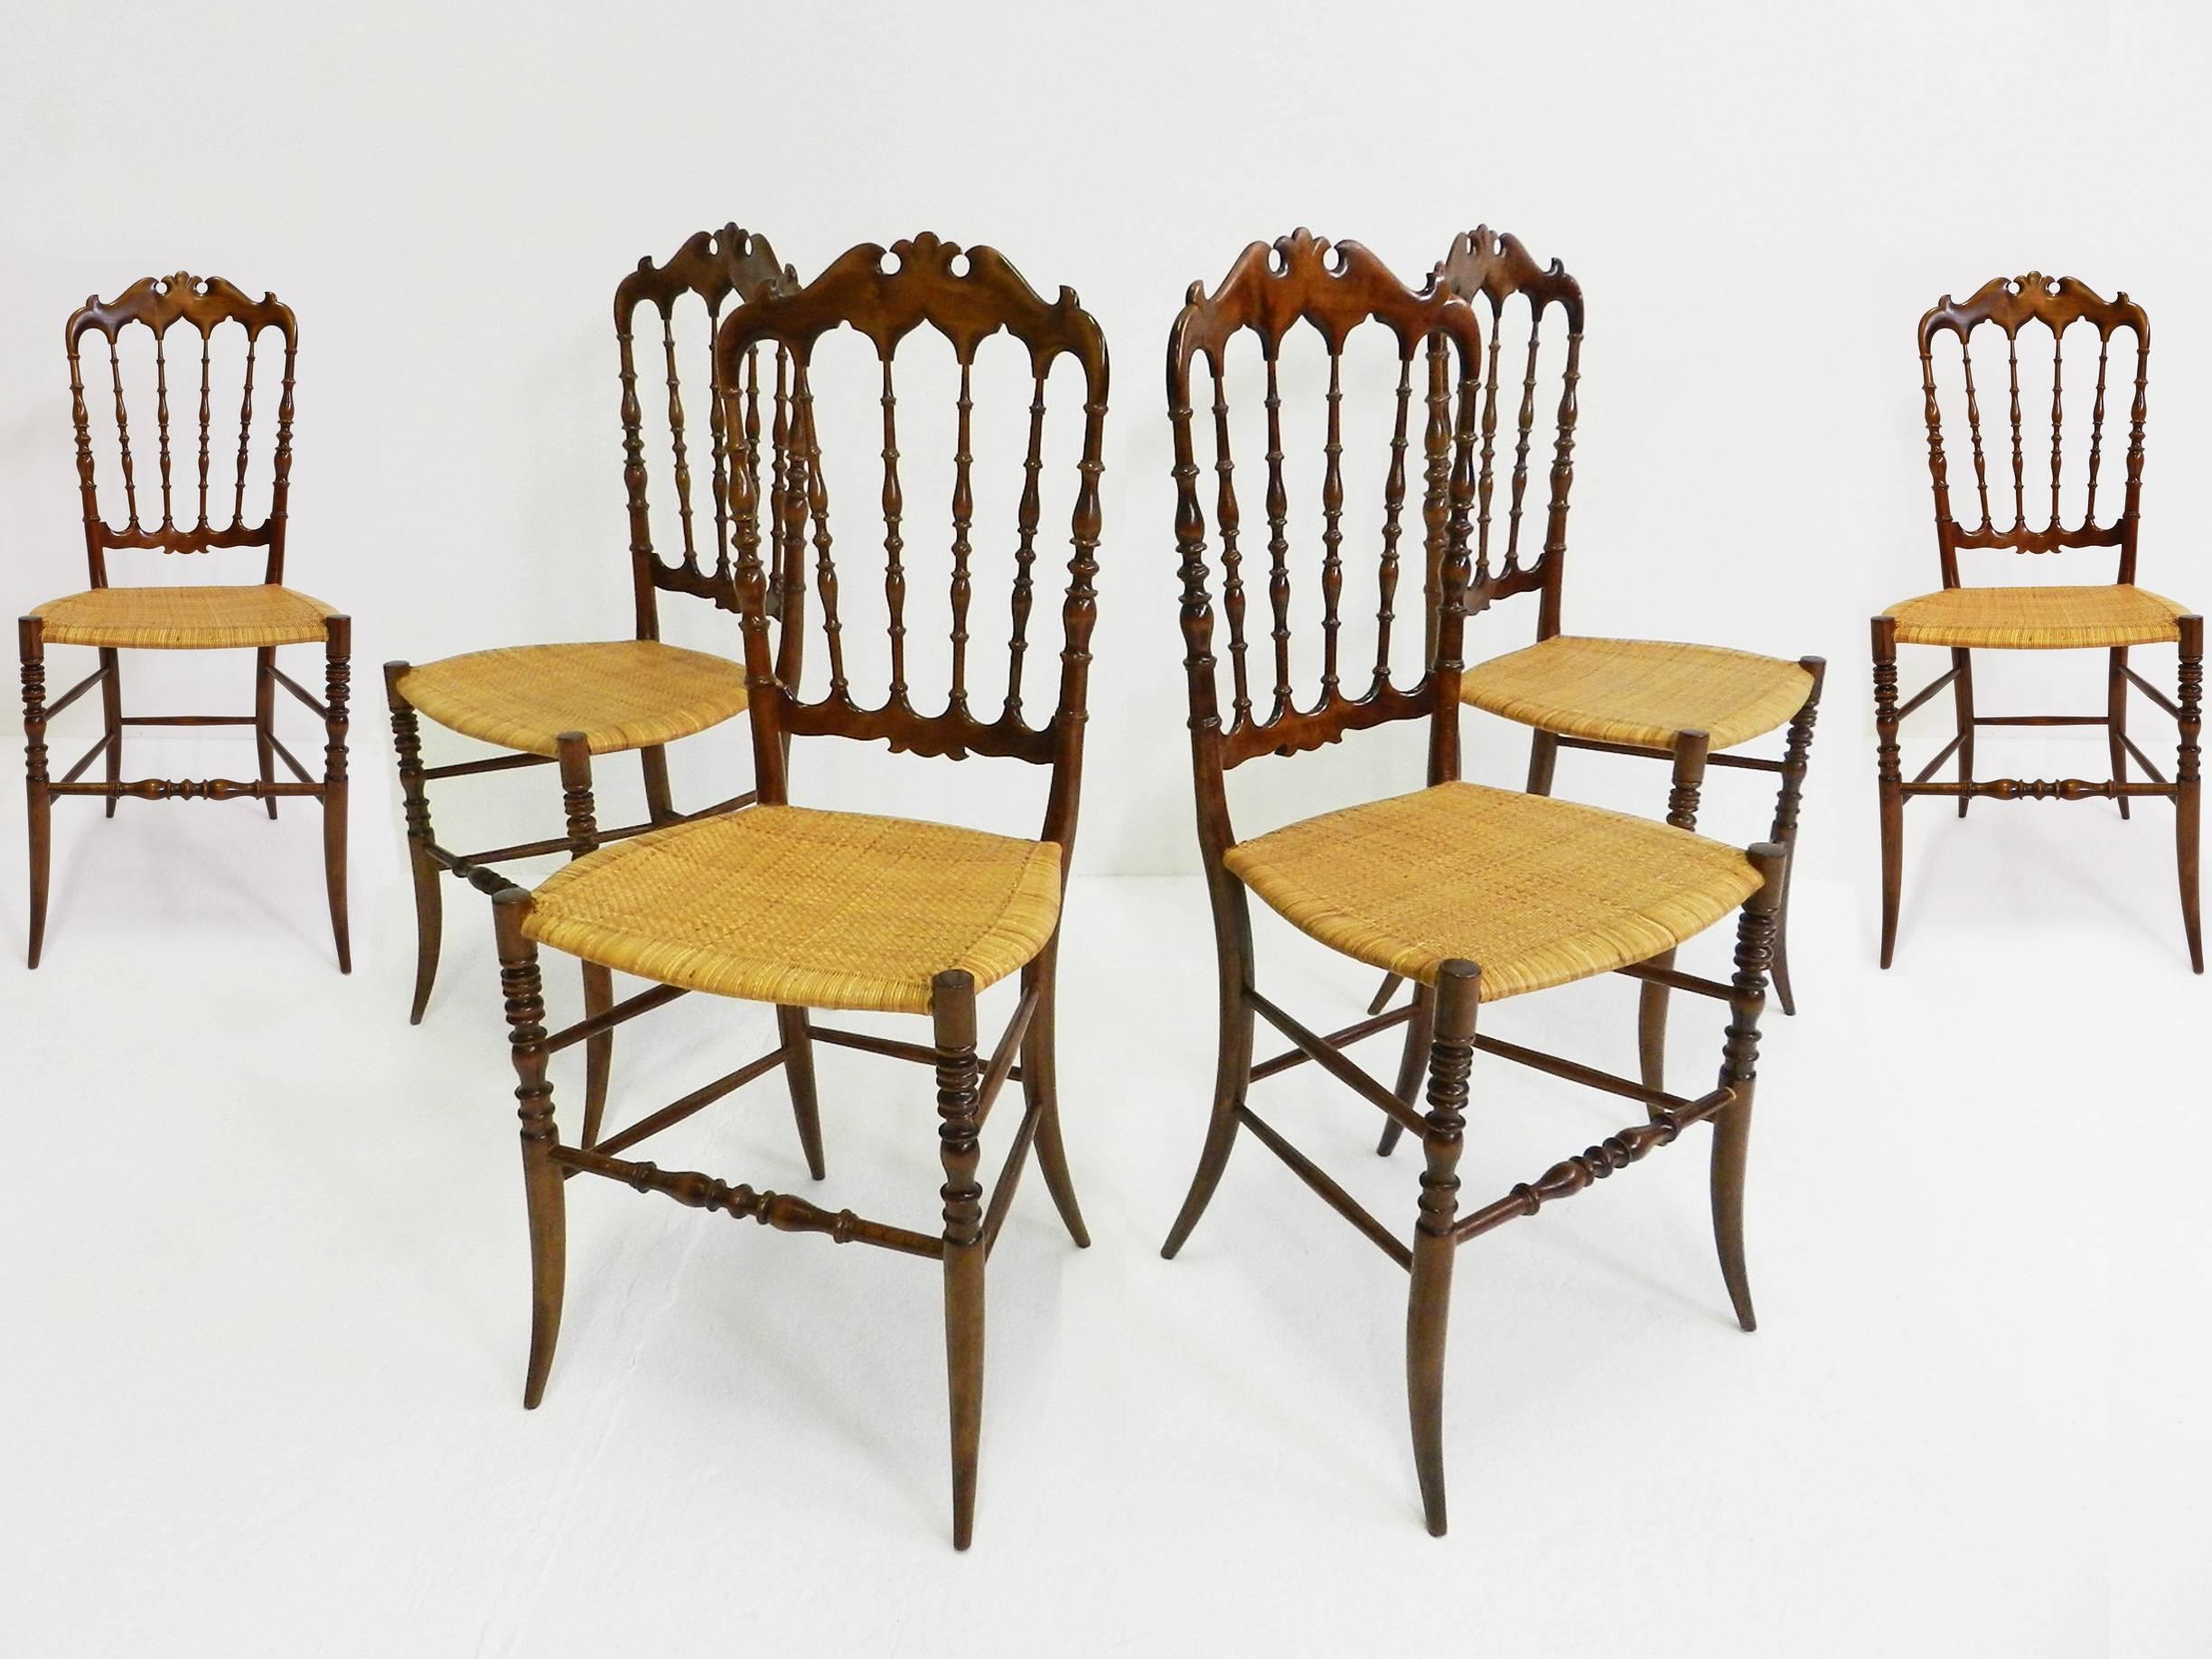 Set of six Chiavarina chairs by Campanino.
Both the straw and the wood are in very good condition.